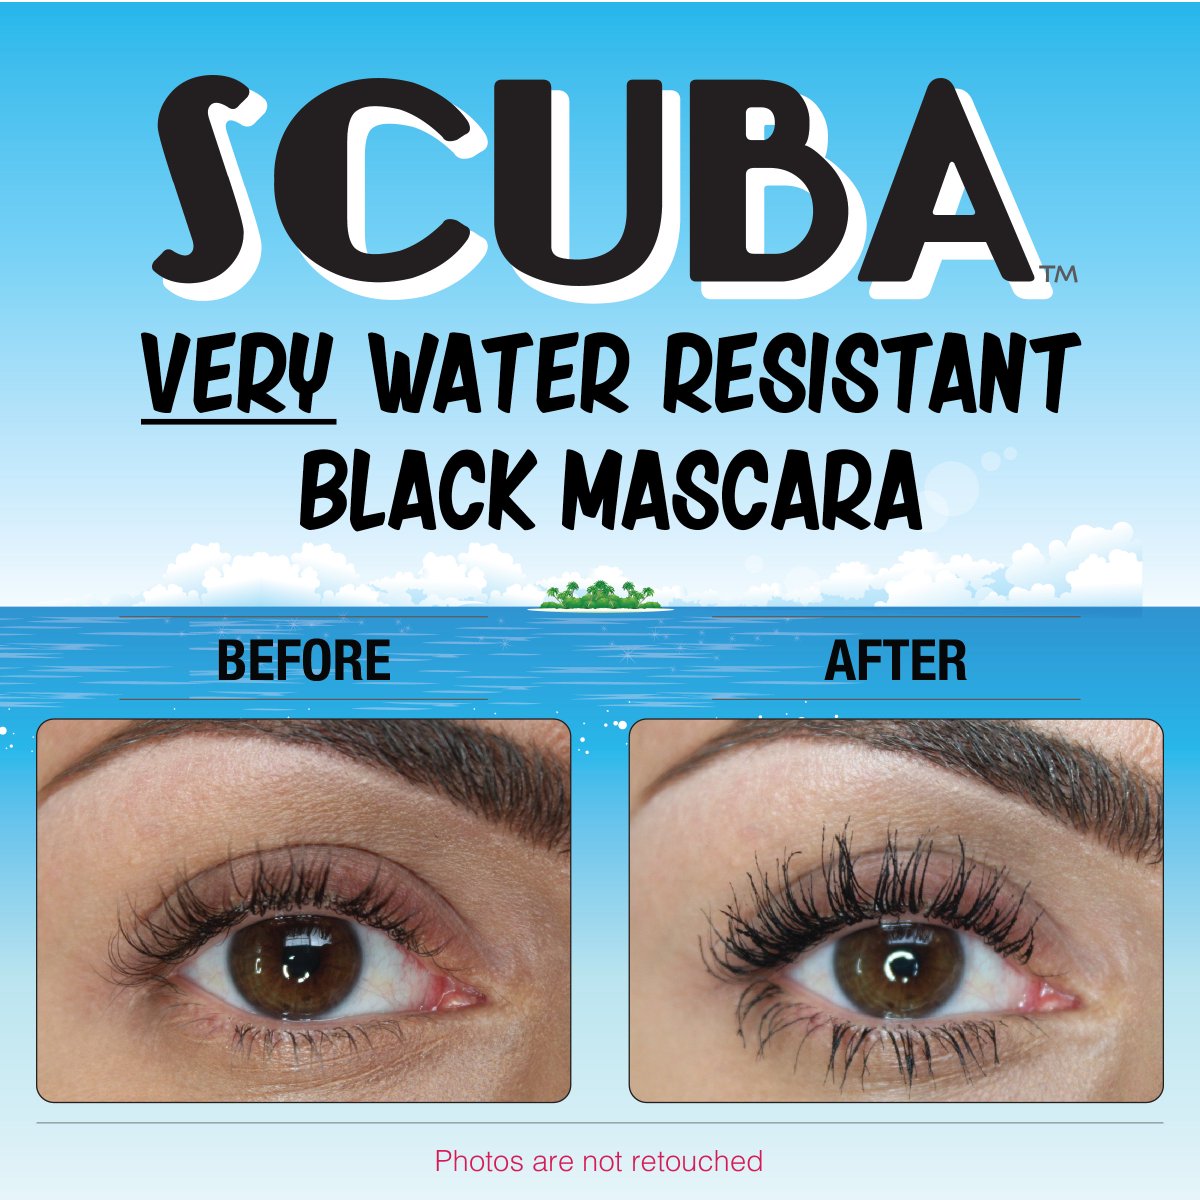 theBalm Cosmetics on Twitter: "Dive right into our new mascara: SCUBA! It's proof! Available at https://t.co/rMlz6ux0d9 for $19 https://t.co/4uS4fQLh2O" Twitter